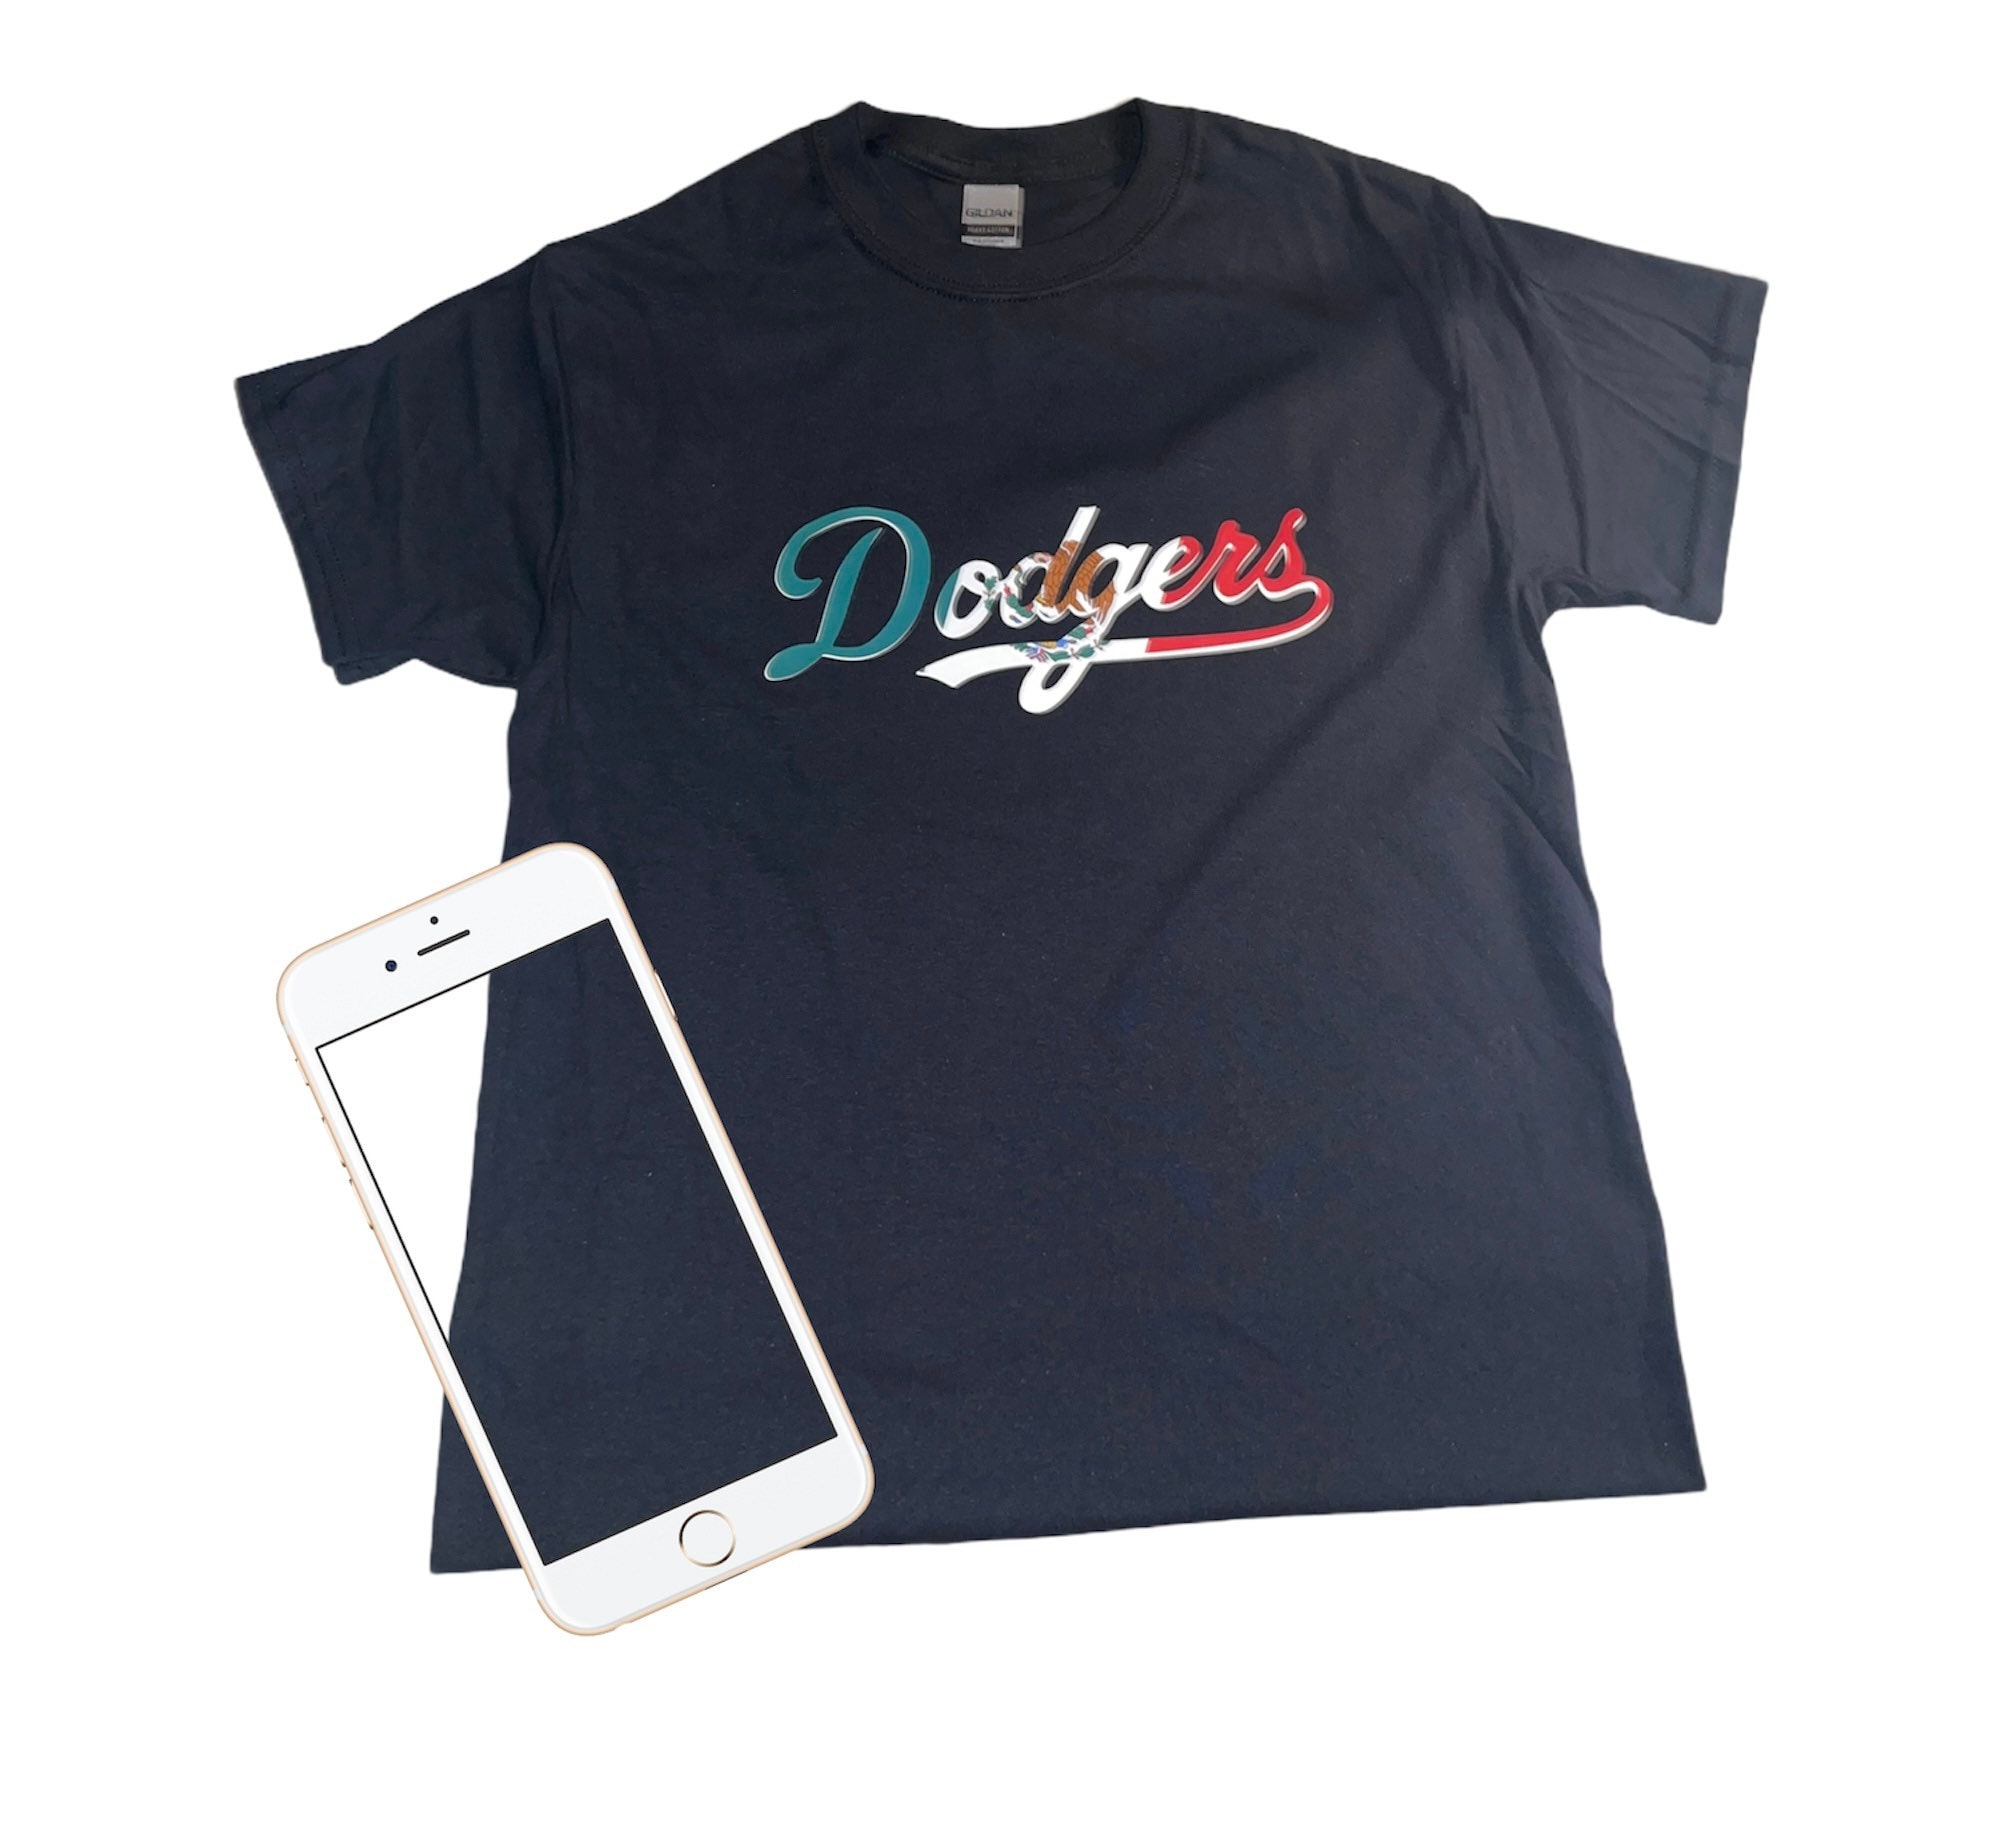 Los Dodgers Jersey Mexico ALL SIZES Dodgers Urias Mens Womens Youth